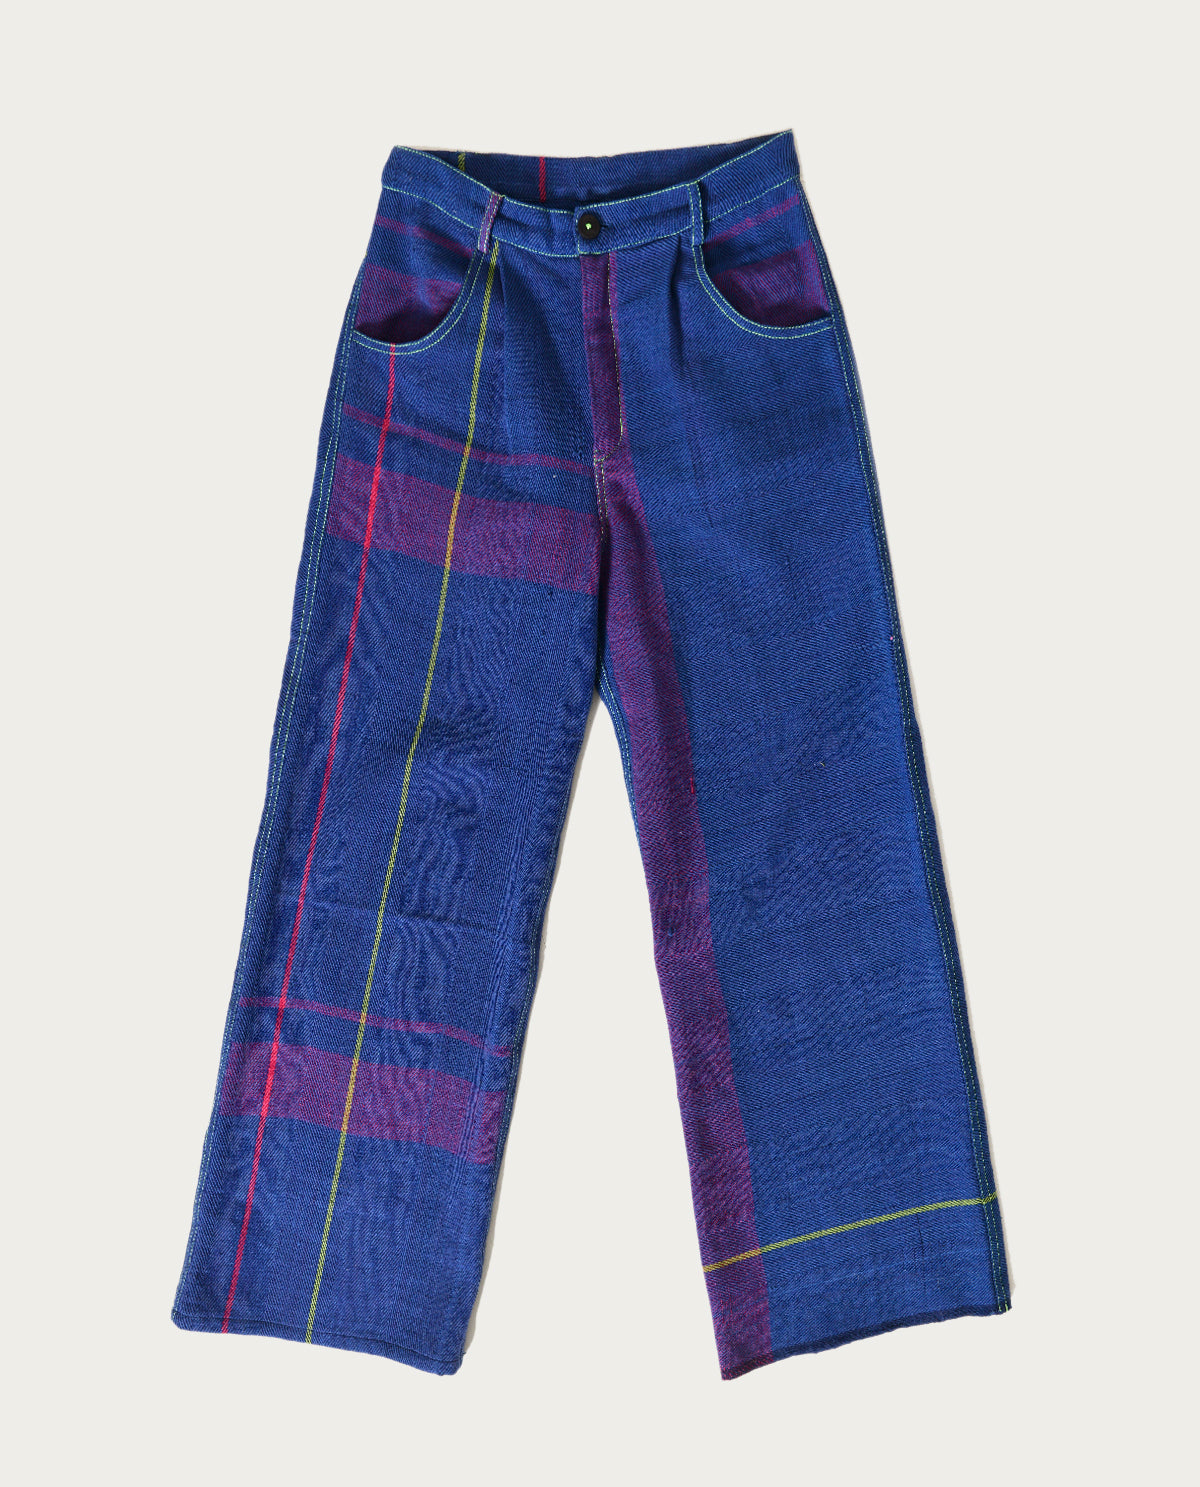 Recycled Blue Striped Cargo Pants by Rias Jaipur with 100% Cotton, Blue, Casual wear, Multicolor, Natural, Pants, RE 2.O, RE 2.O by Rias Jaipur, Regular, Stripes, Unisex, Womenswear at Kamakhyaa for sustainable fashion